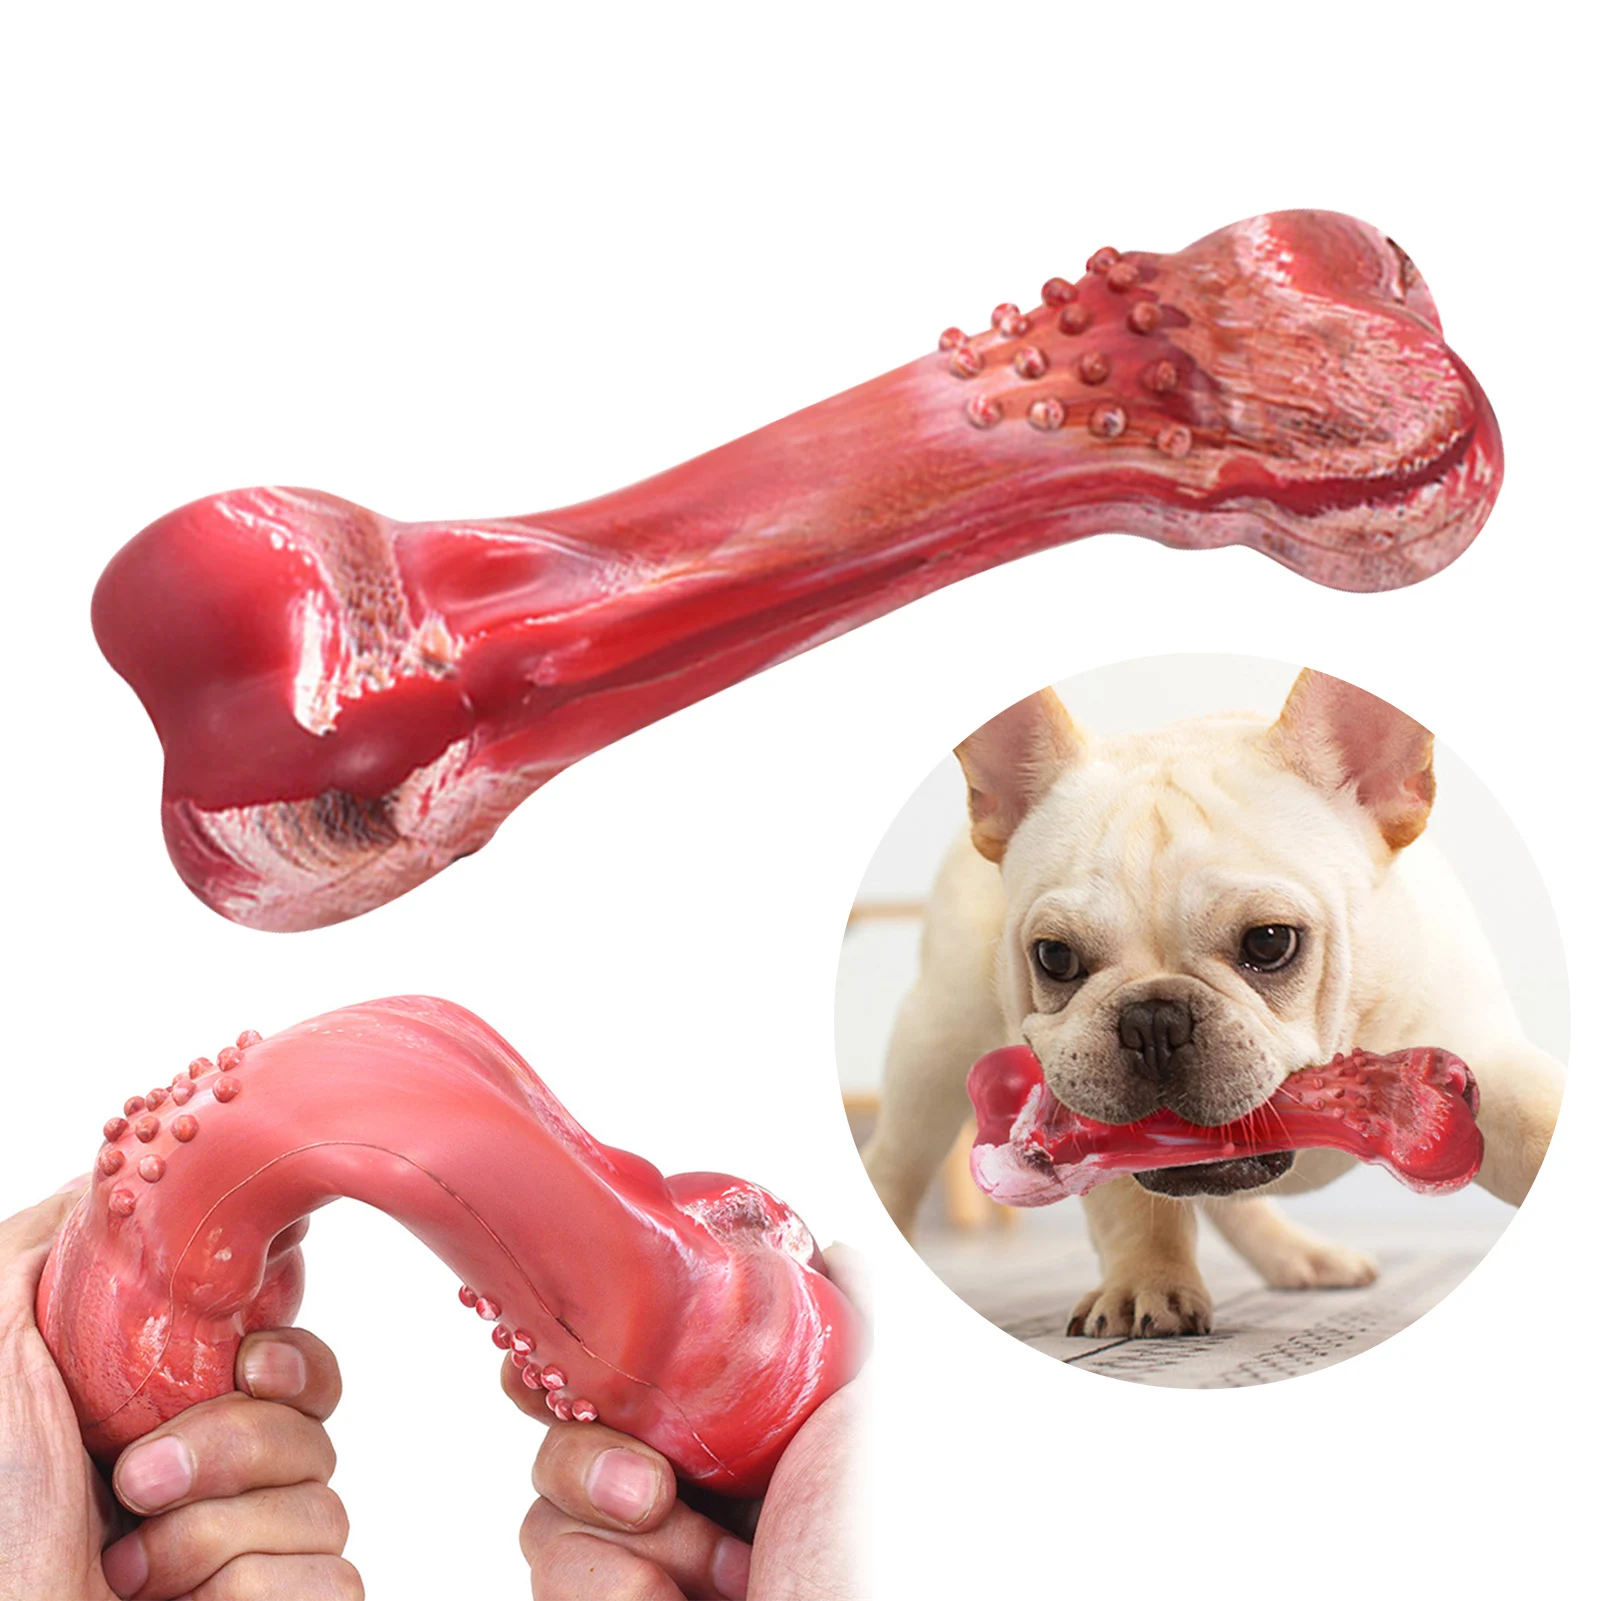 

Interactive Pet Toy Leaking Food Cleaning Indestructible Squeaky Sounding Bite Resistant Simulation Bone Molars Training Chewing